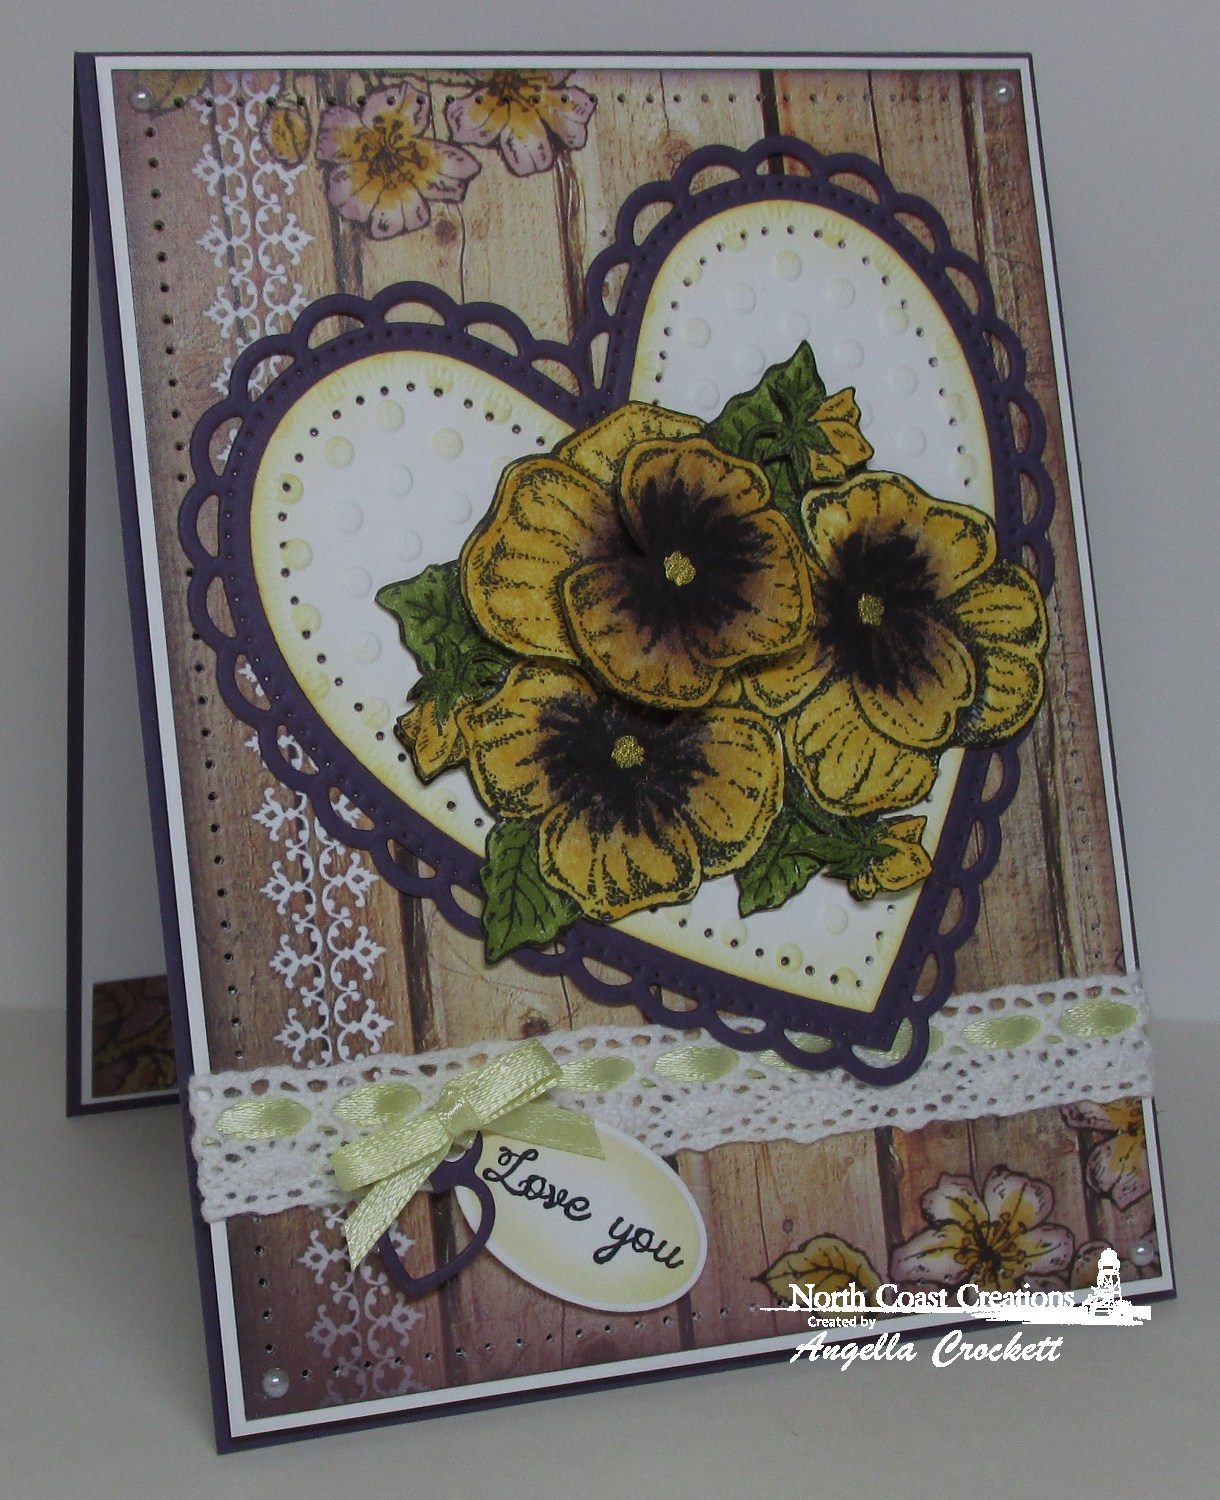 Stamps - North Coast Creation Pansies, ODBD Custom Ornate Hearts Dies, ODBD Custom Mini Tags Dies, ODBD Rustic Beauty Paper Collection